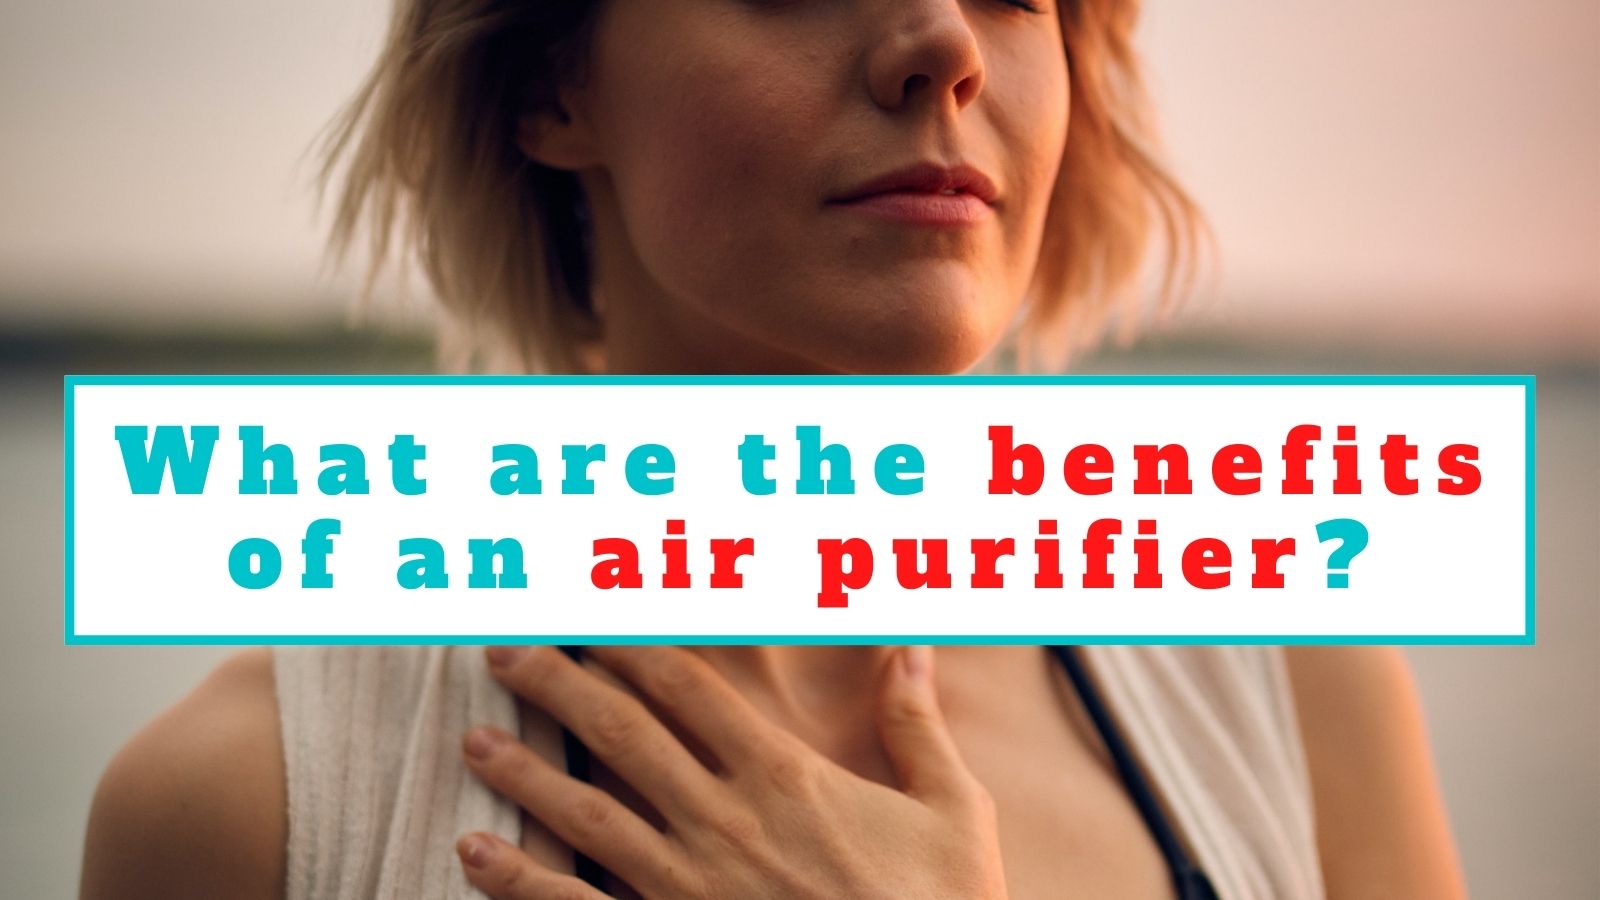 What are the benefits of an air purifier?